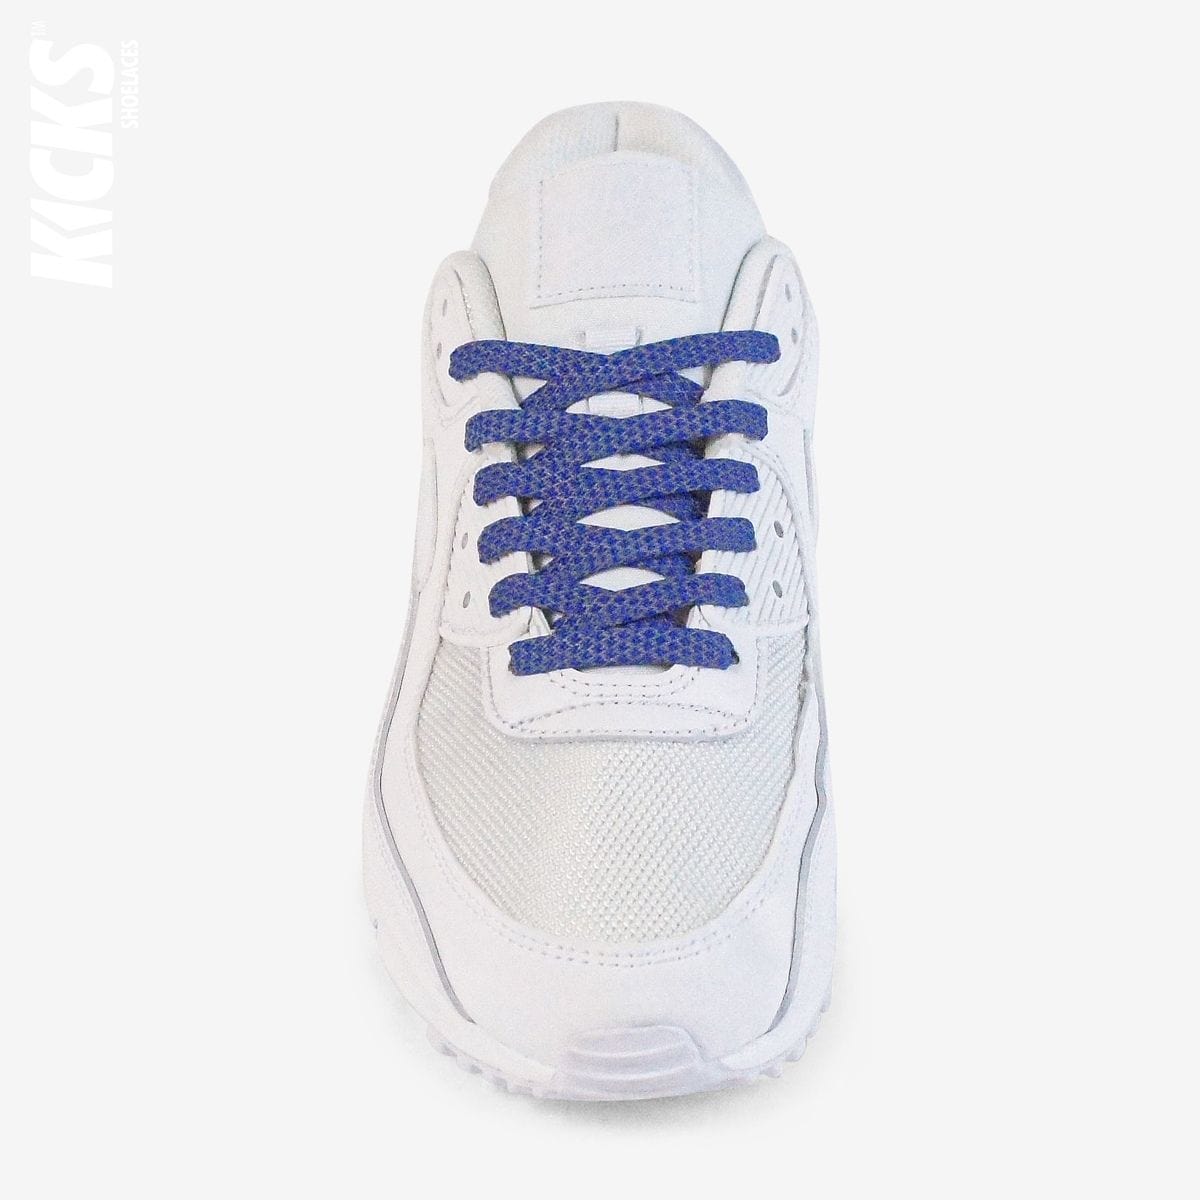 sneaker-laces-for-running-shoes-in-reflective-blue